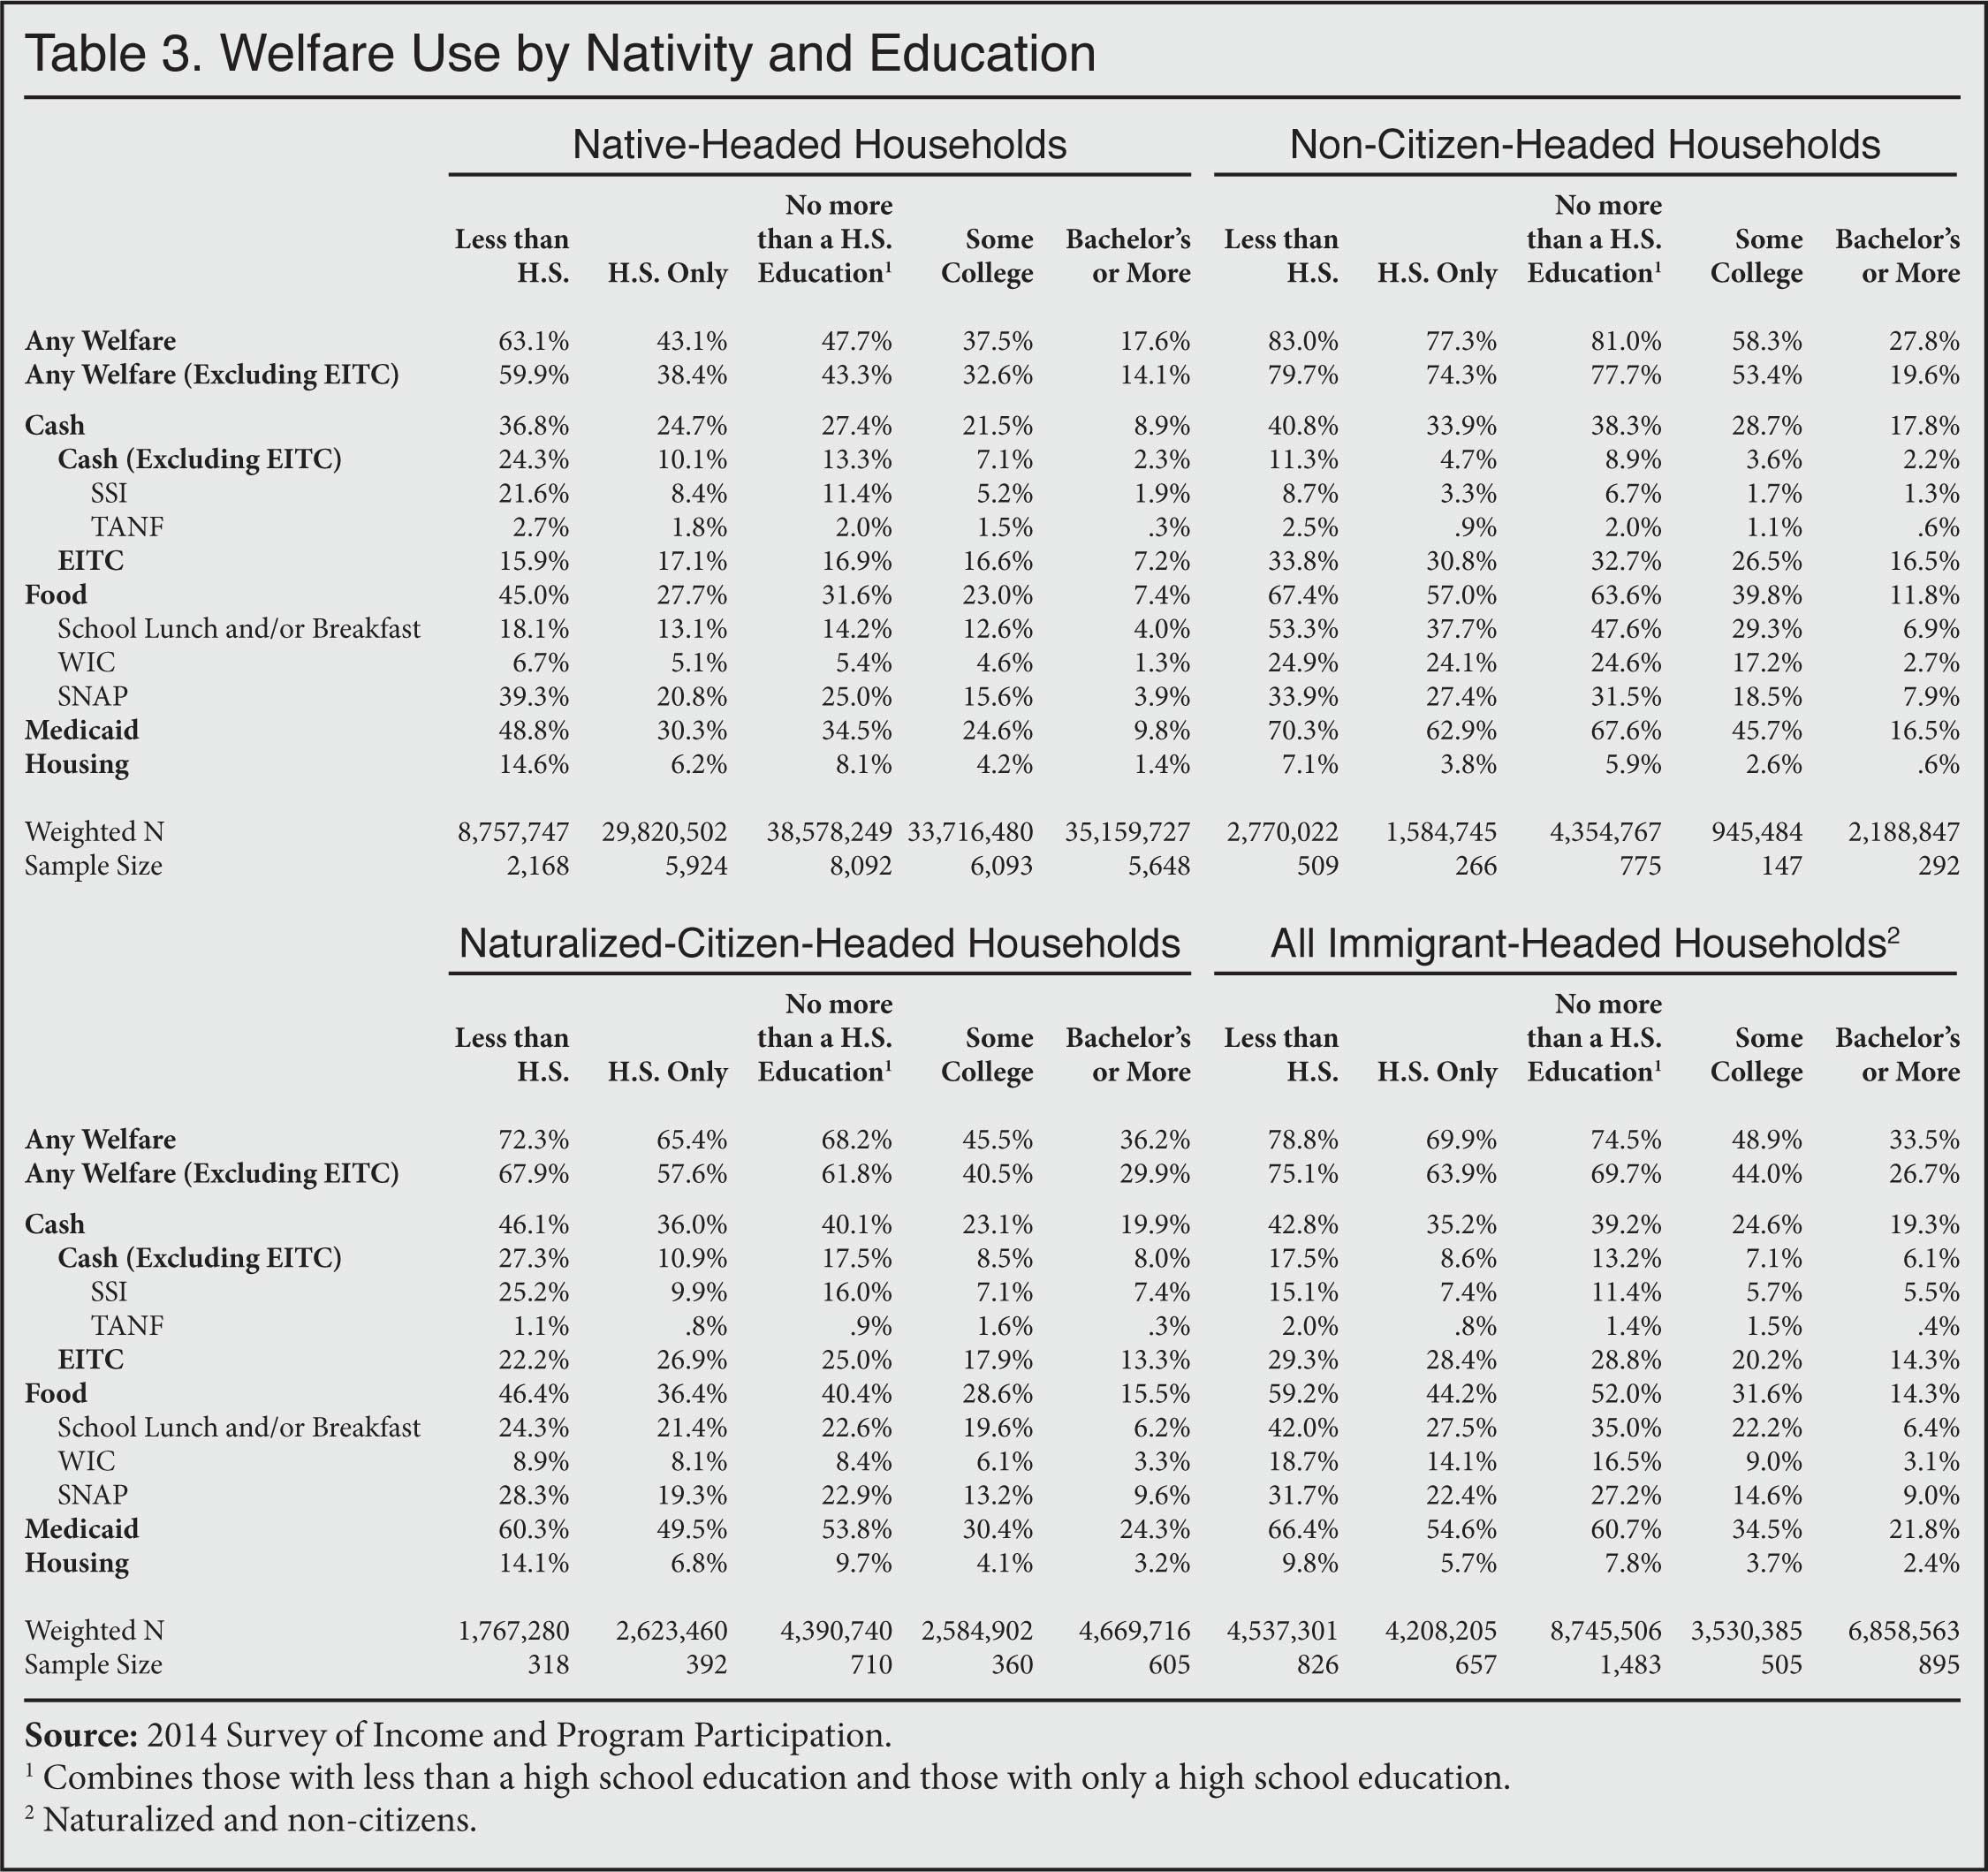 Table: Welfare use by nativity and education